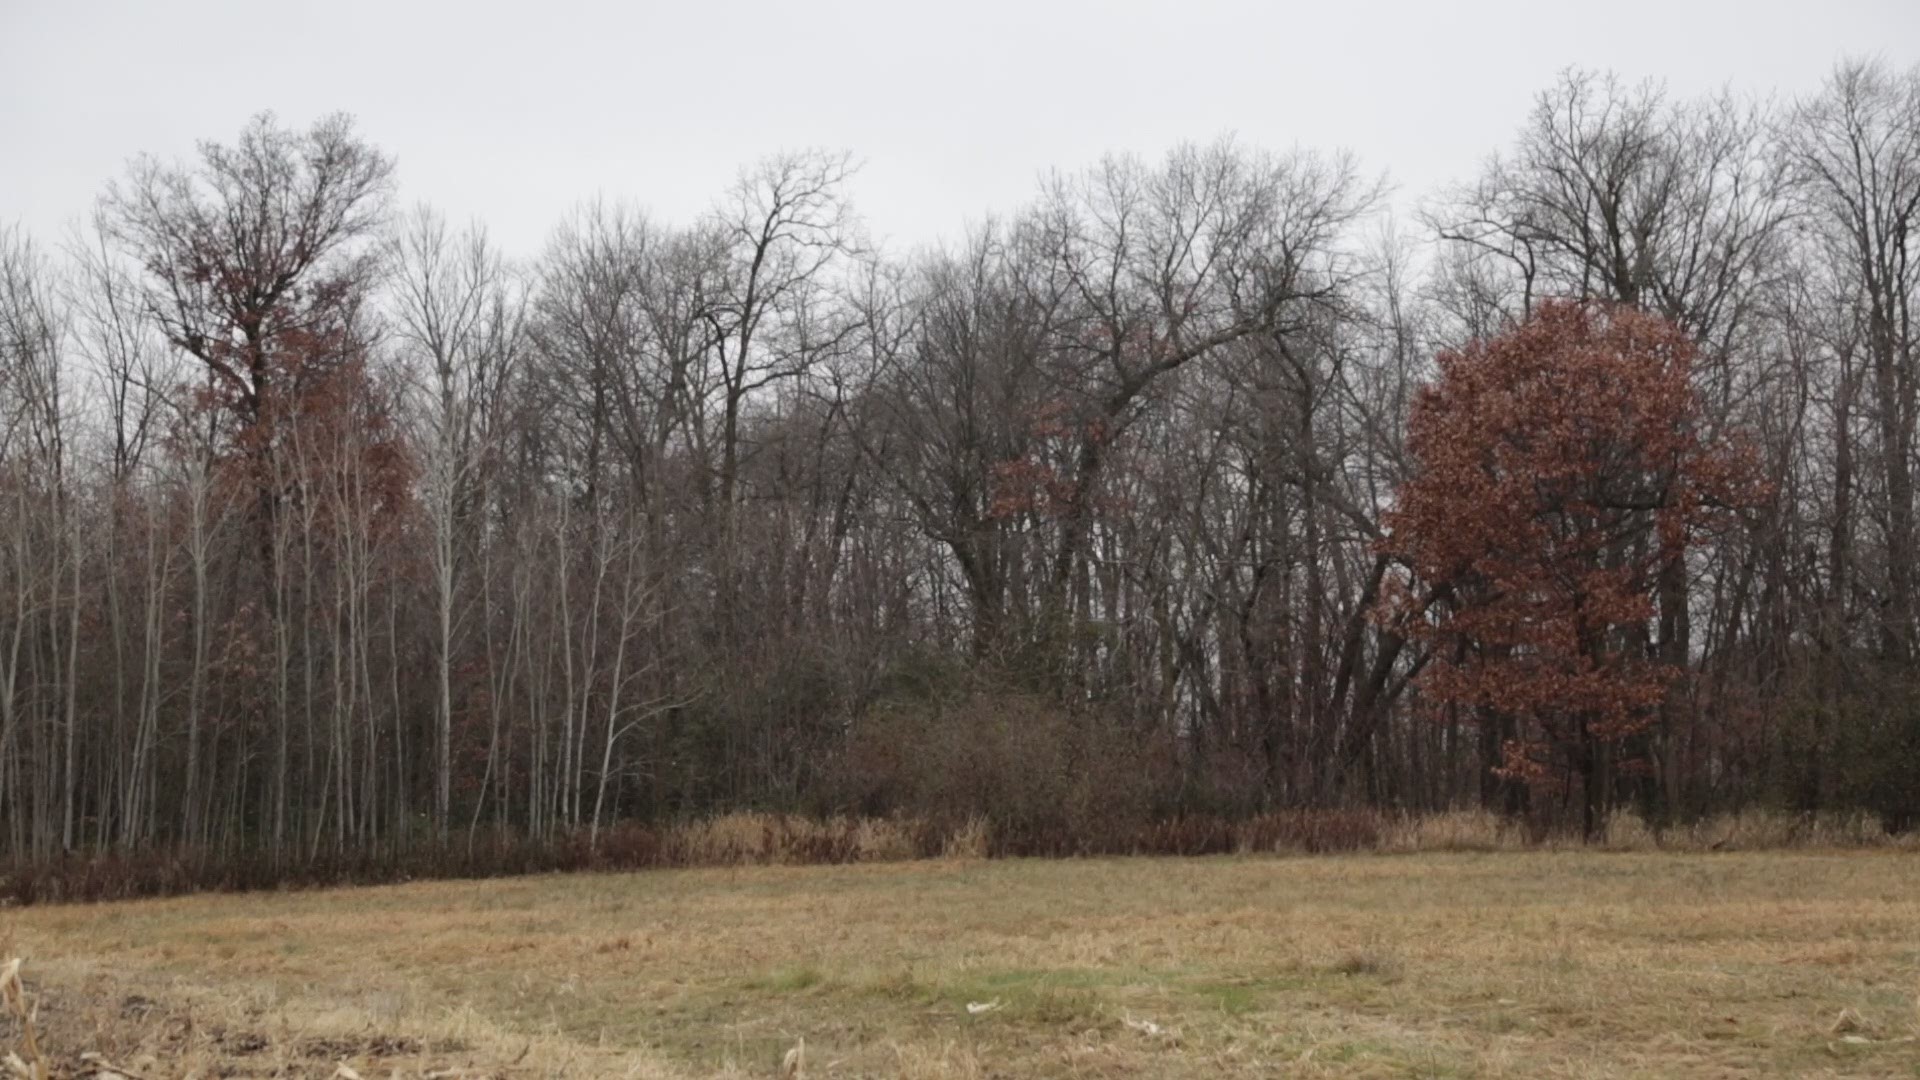 The filmmaking team behind a documentary on the kidnapping of Jacob Wetterling is kicking off a fundraising effort to complete the project. Here is a raw version of a scene to be included.